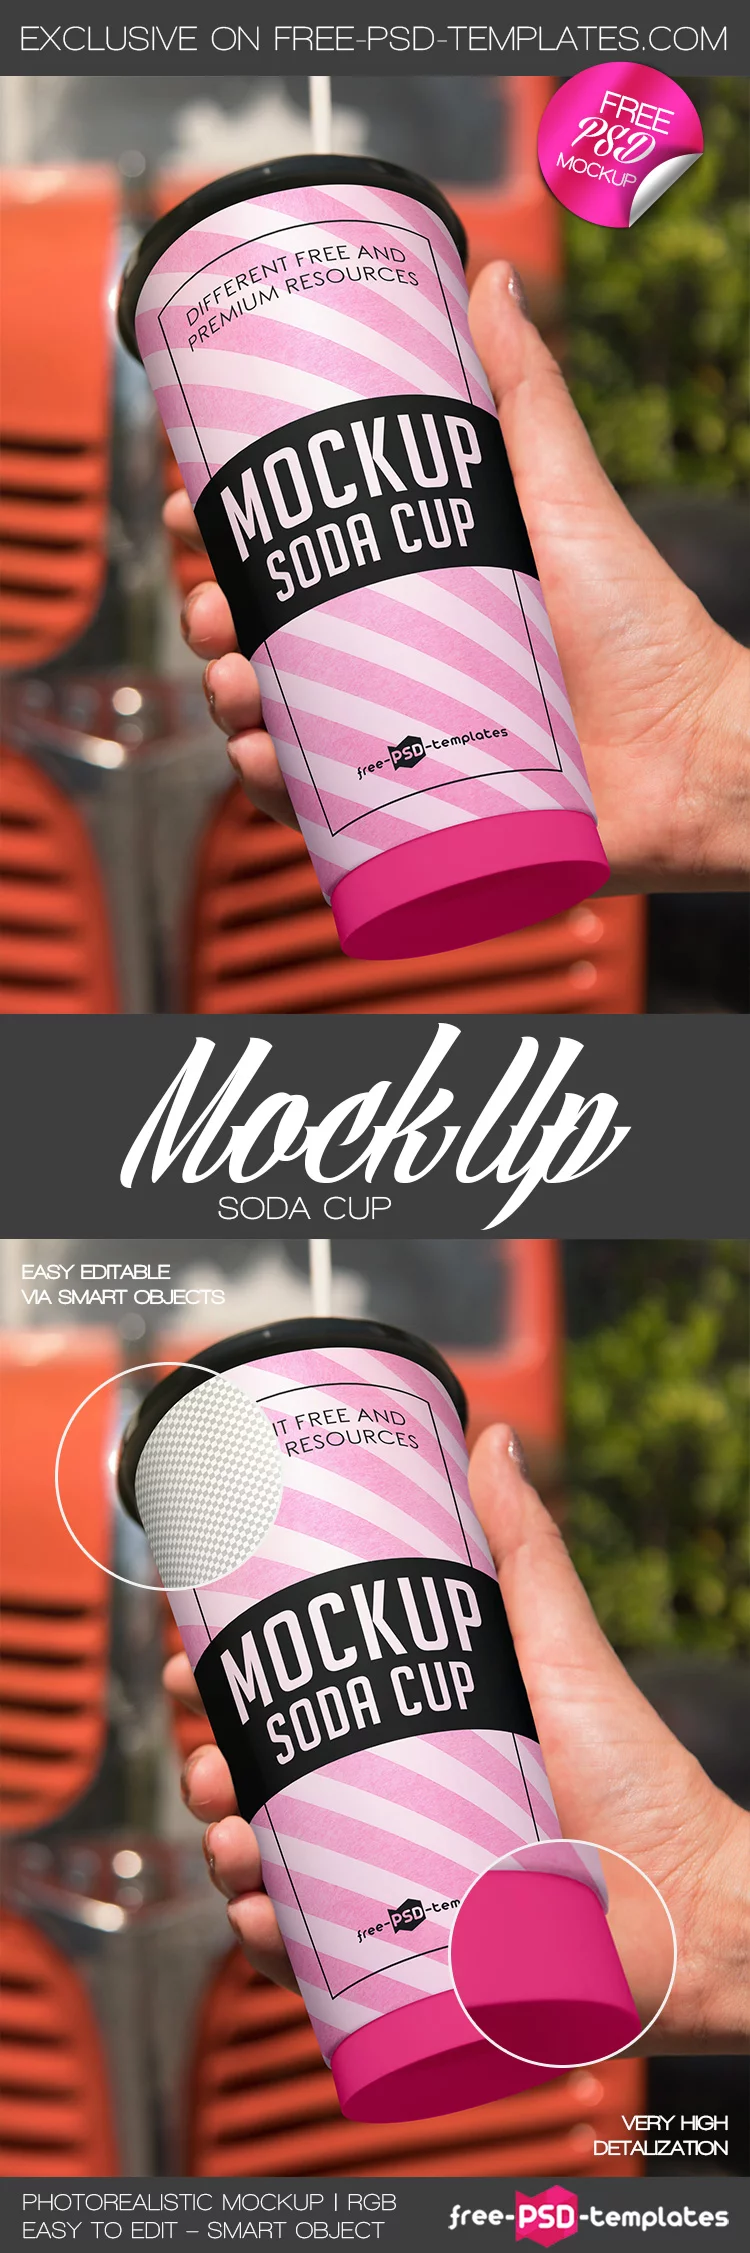 Free Soda Cup Mock-up in PSD